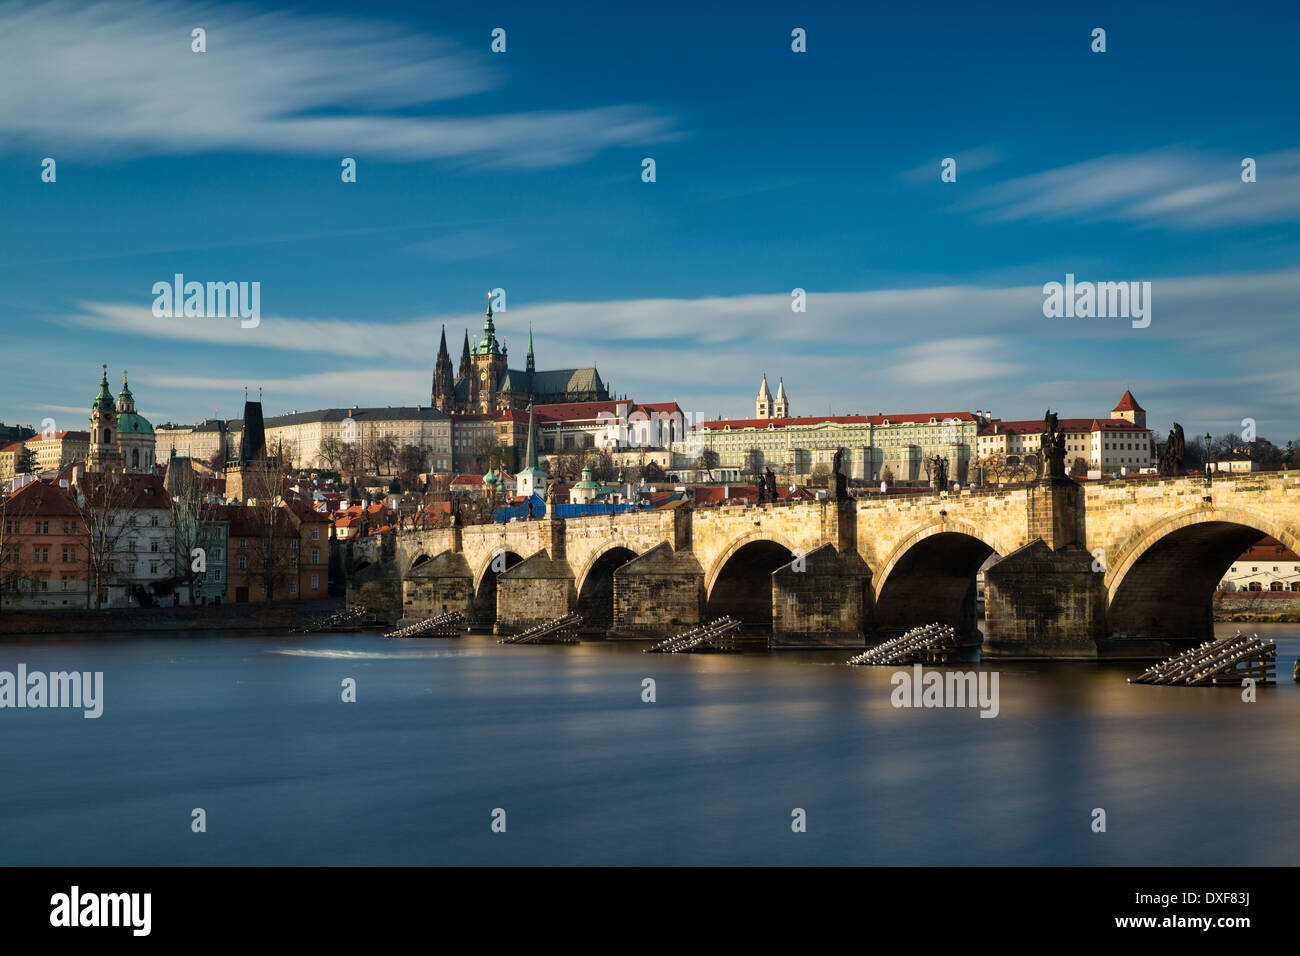 the Castle District, St Vitus Cathedral and the Charles Bridge over the River Vltava, Prague, Czech Republic Stock Photo